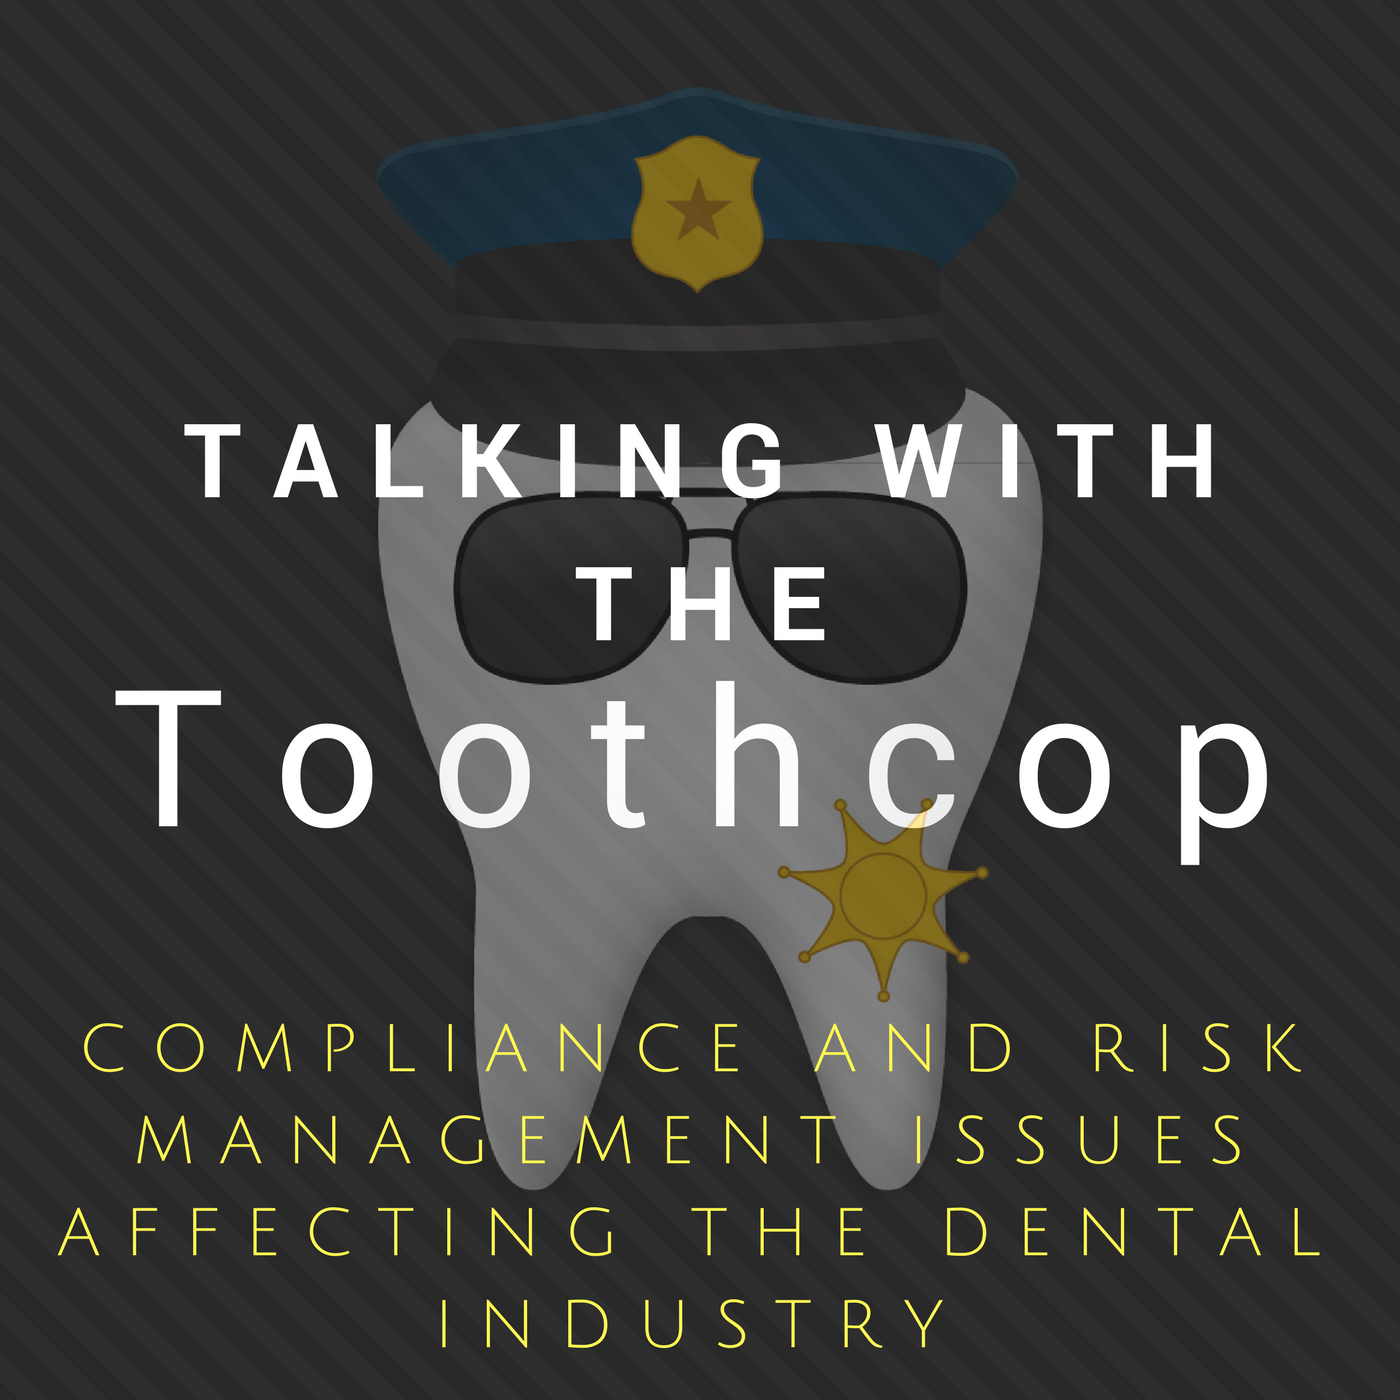 Dental Compliance Rules: NEW in 2021